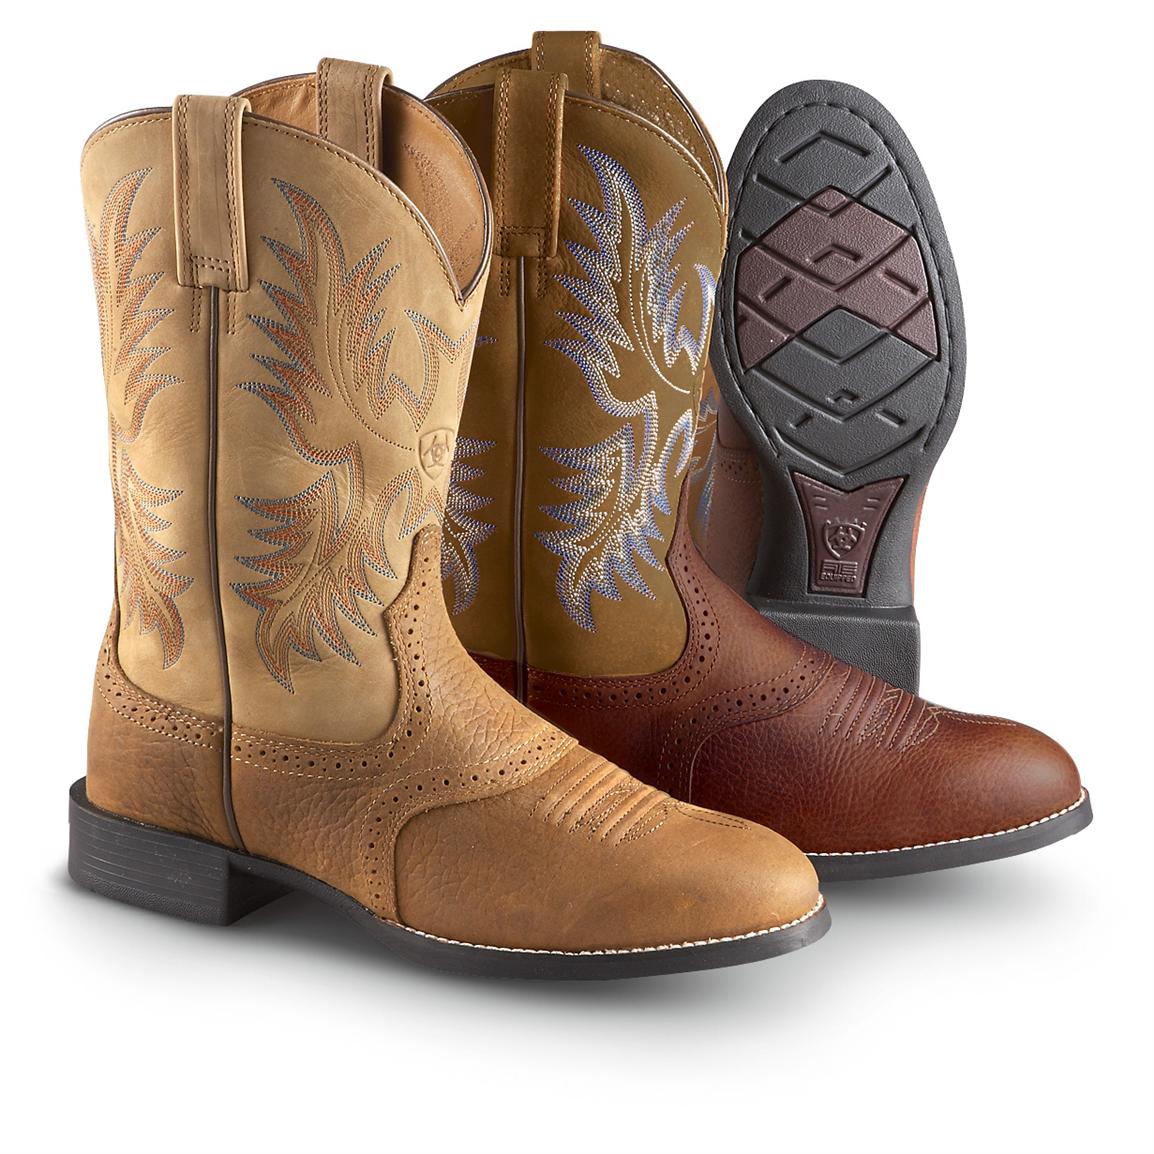 Men's Ariat Stockman Boots - 282589, Cowboy & Western Boots at ...